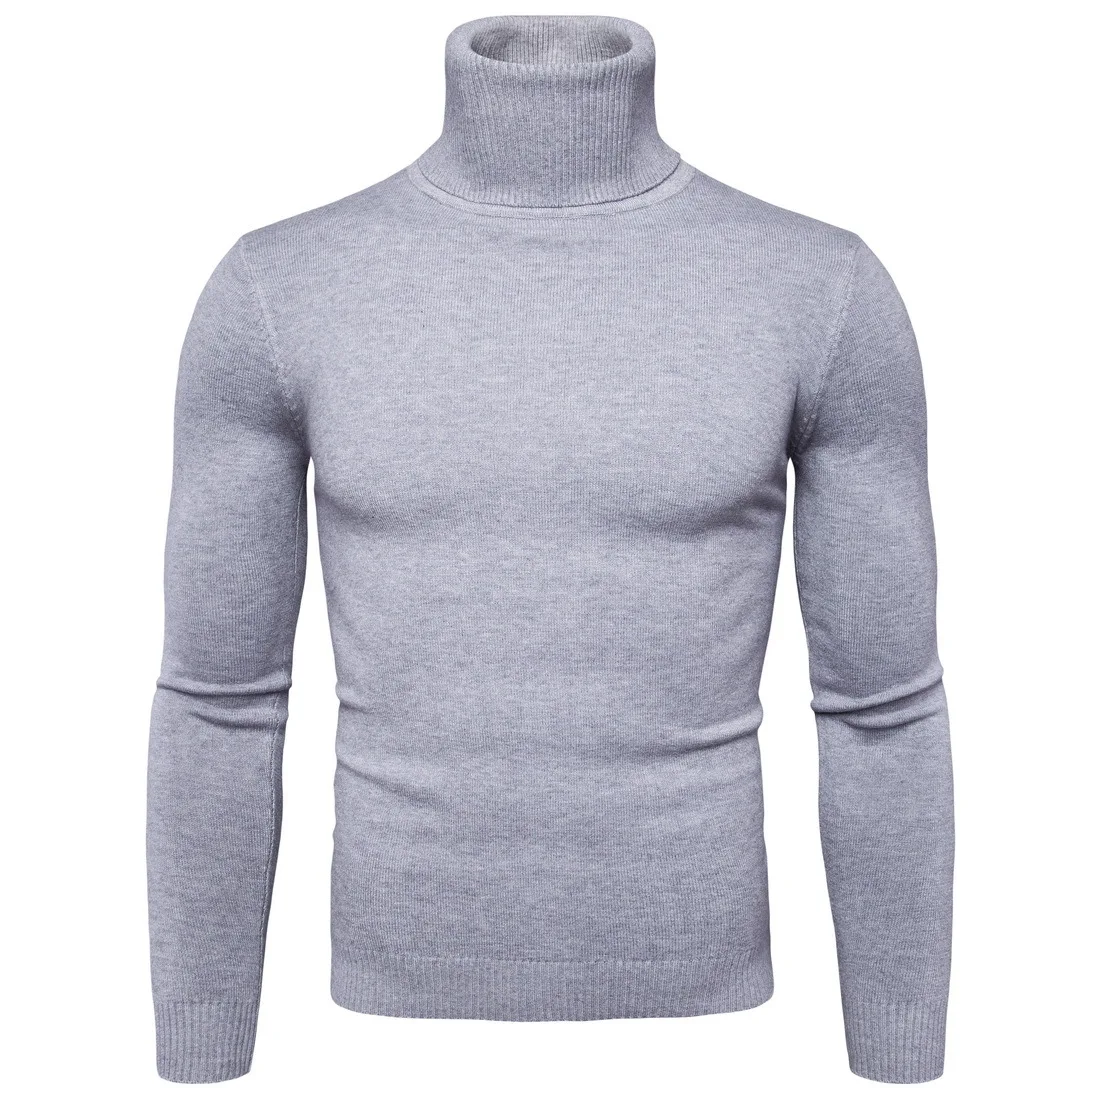 Basic Pullovers Sweater Men Casual Cotton Spliced O-neck Knitted Sweaters